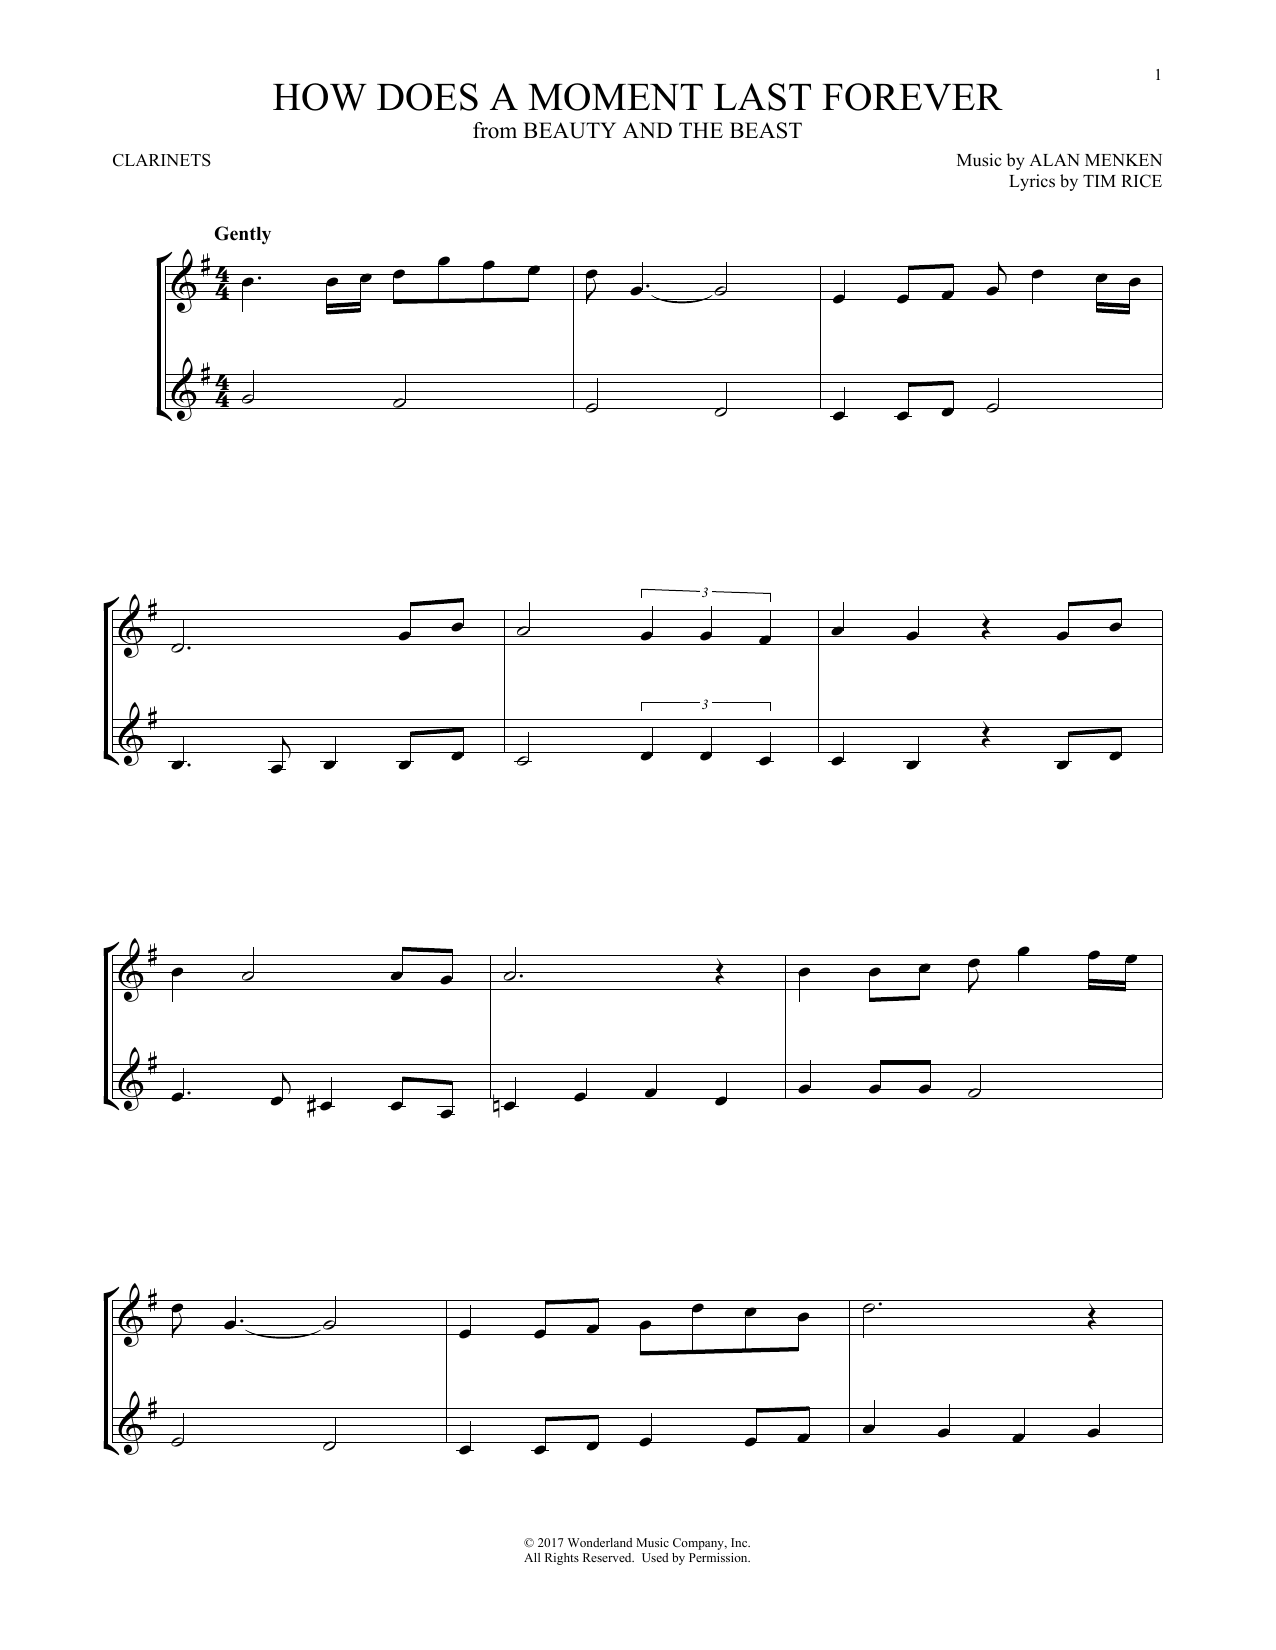 Download Celine Dion How Does A Moment Last Forever (from Be Sheet Music